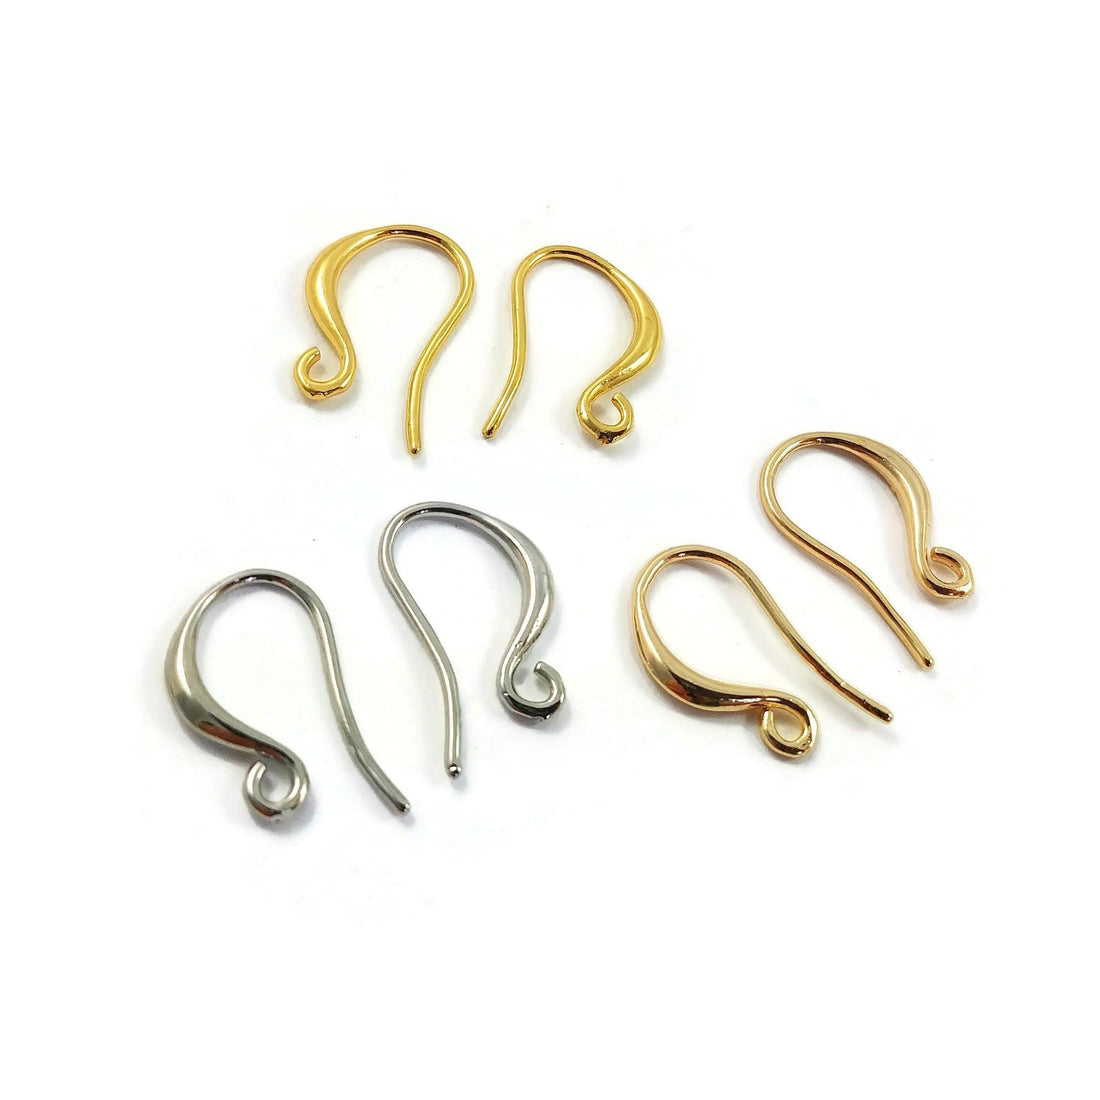 50pcs 3Style Stainless Steel DIY Earring Findings Clasps Hooks Fishhook  Clasps For Jewelry Making Accessories Earwire Supplies